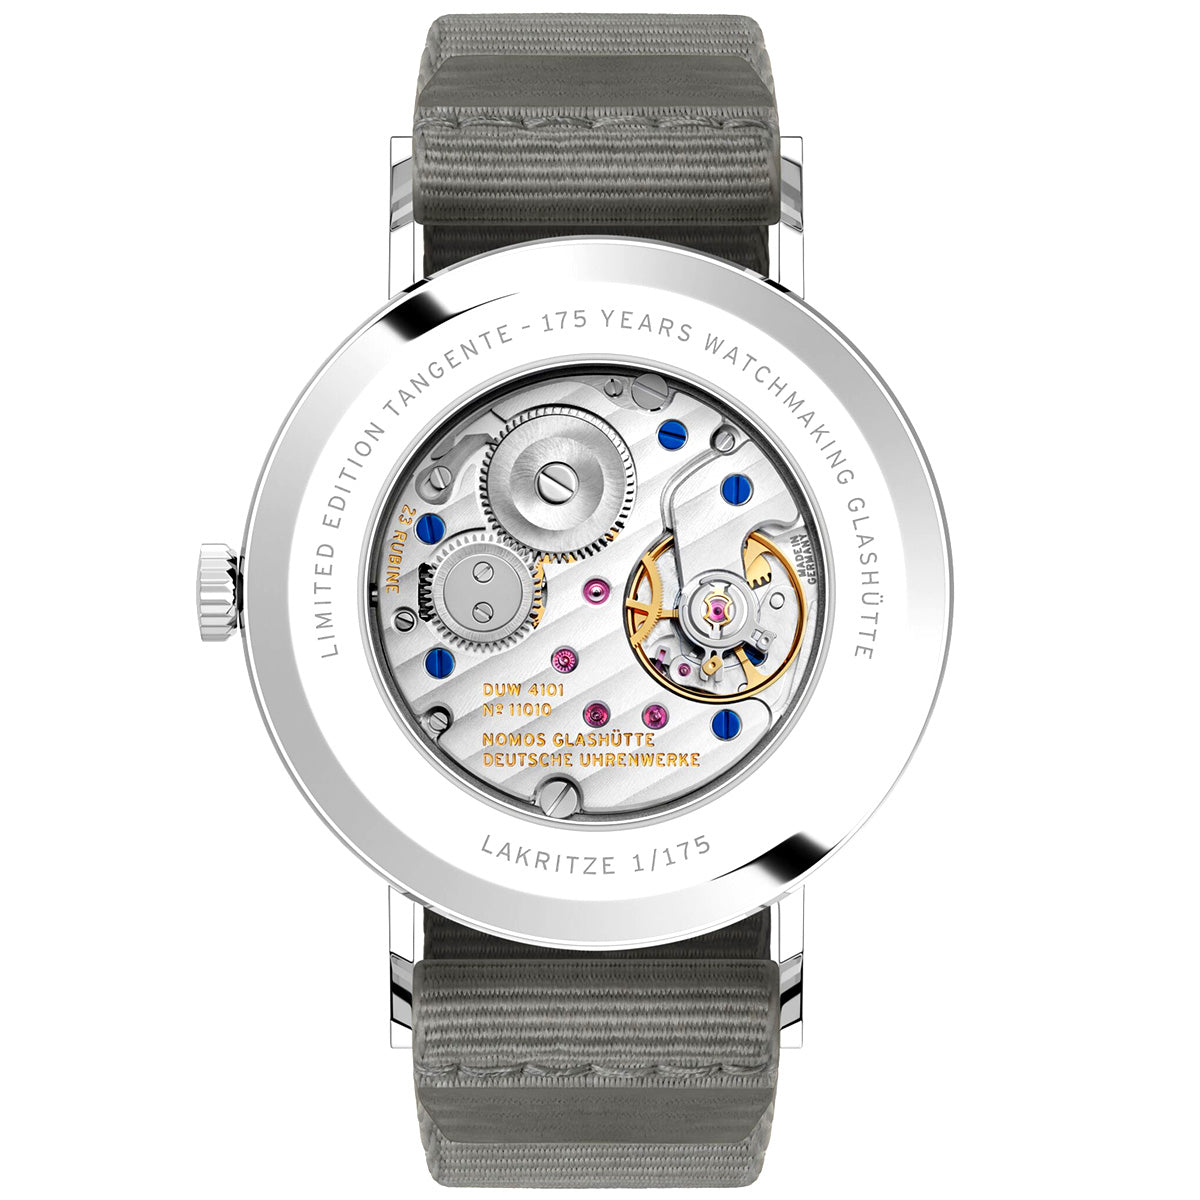 Tangente 38mm 'Lakritze' Limited Edition Watch